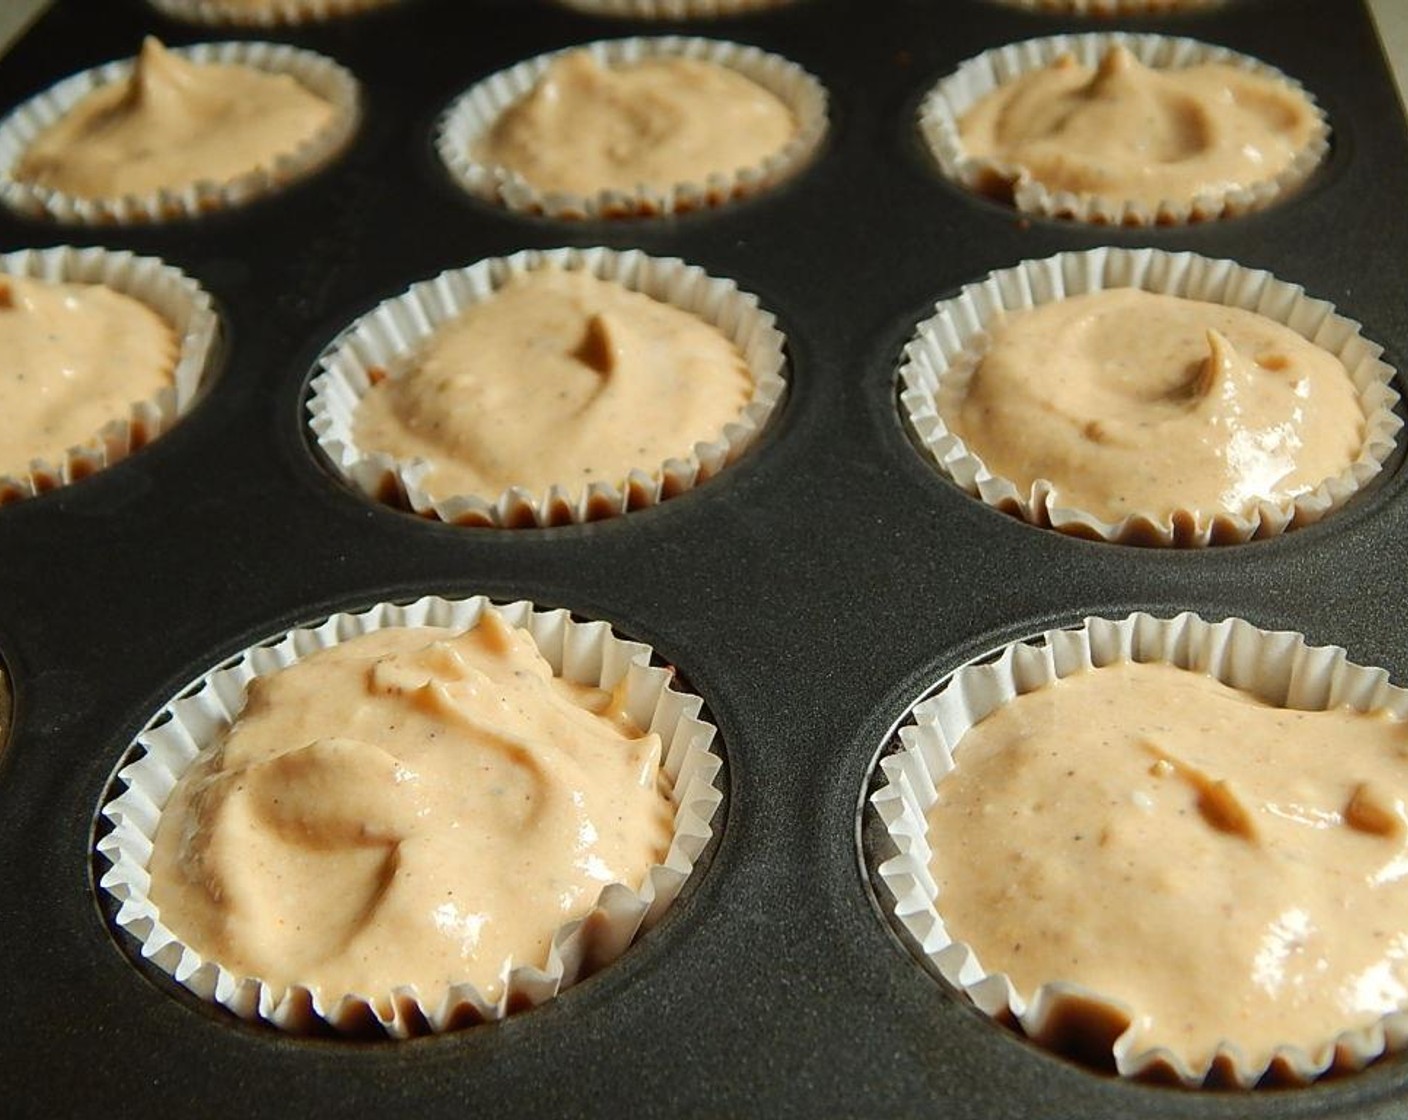 step 4 Use an electric mixer to beat together Light Cream Cheese (3/4 cup), Granulated Sugar (1 Tbsp), All-Purpose Flour (1/2 Tbsp), Eggs (2). Canned Pumpkin Purée (1/4 cup), Vanilla Extract (1/2 tsp), and Ground Nutmeg (1/2 tsp). Spoon into muffin liners. Bake in oven for 14 minutes.